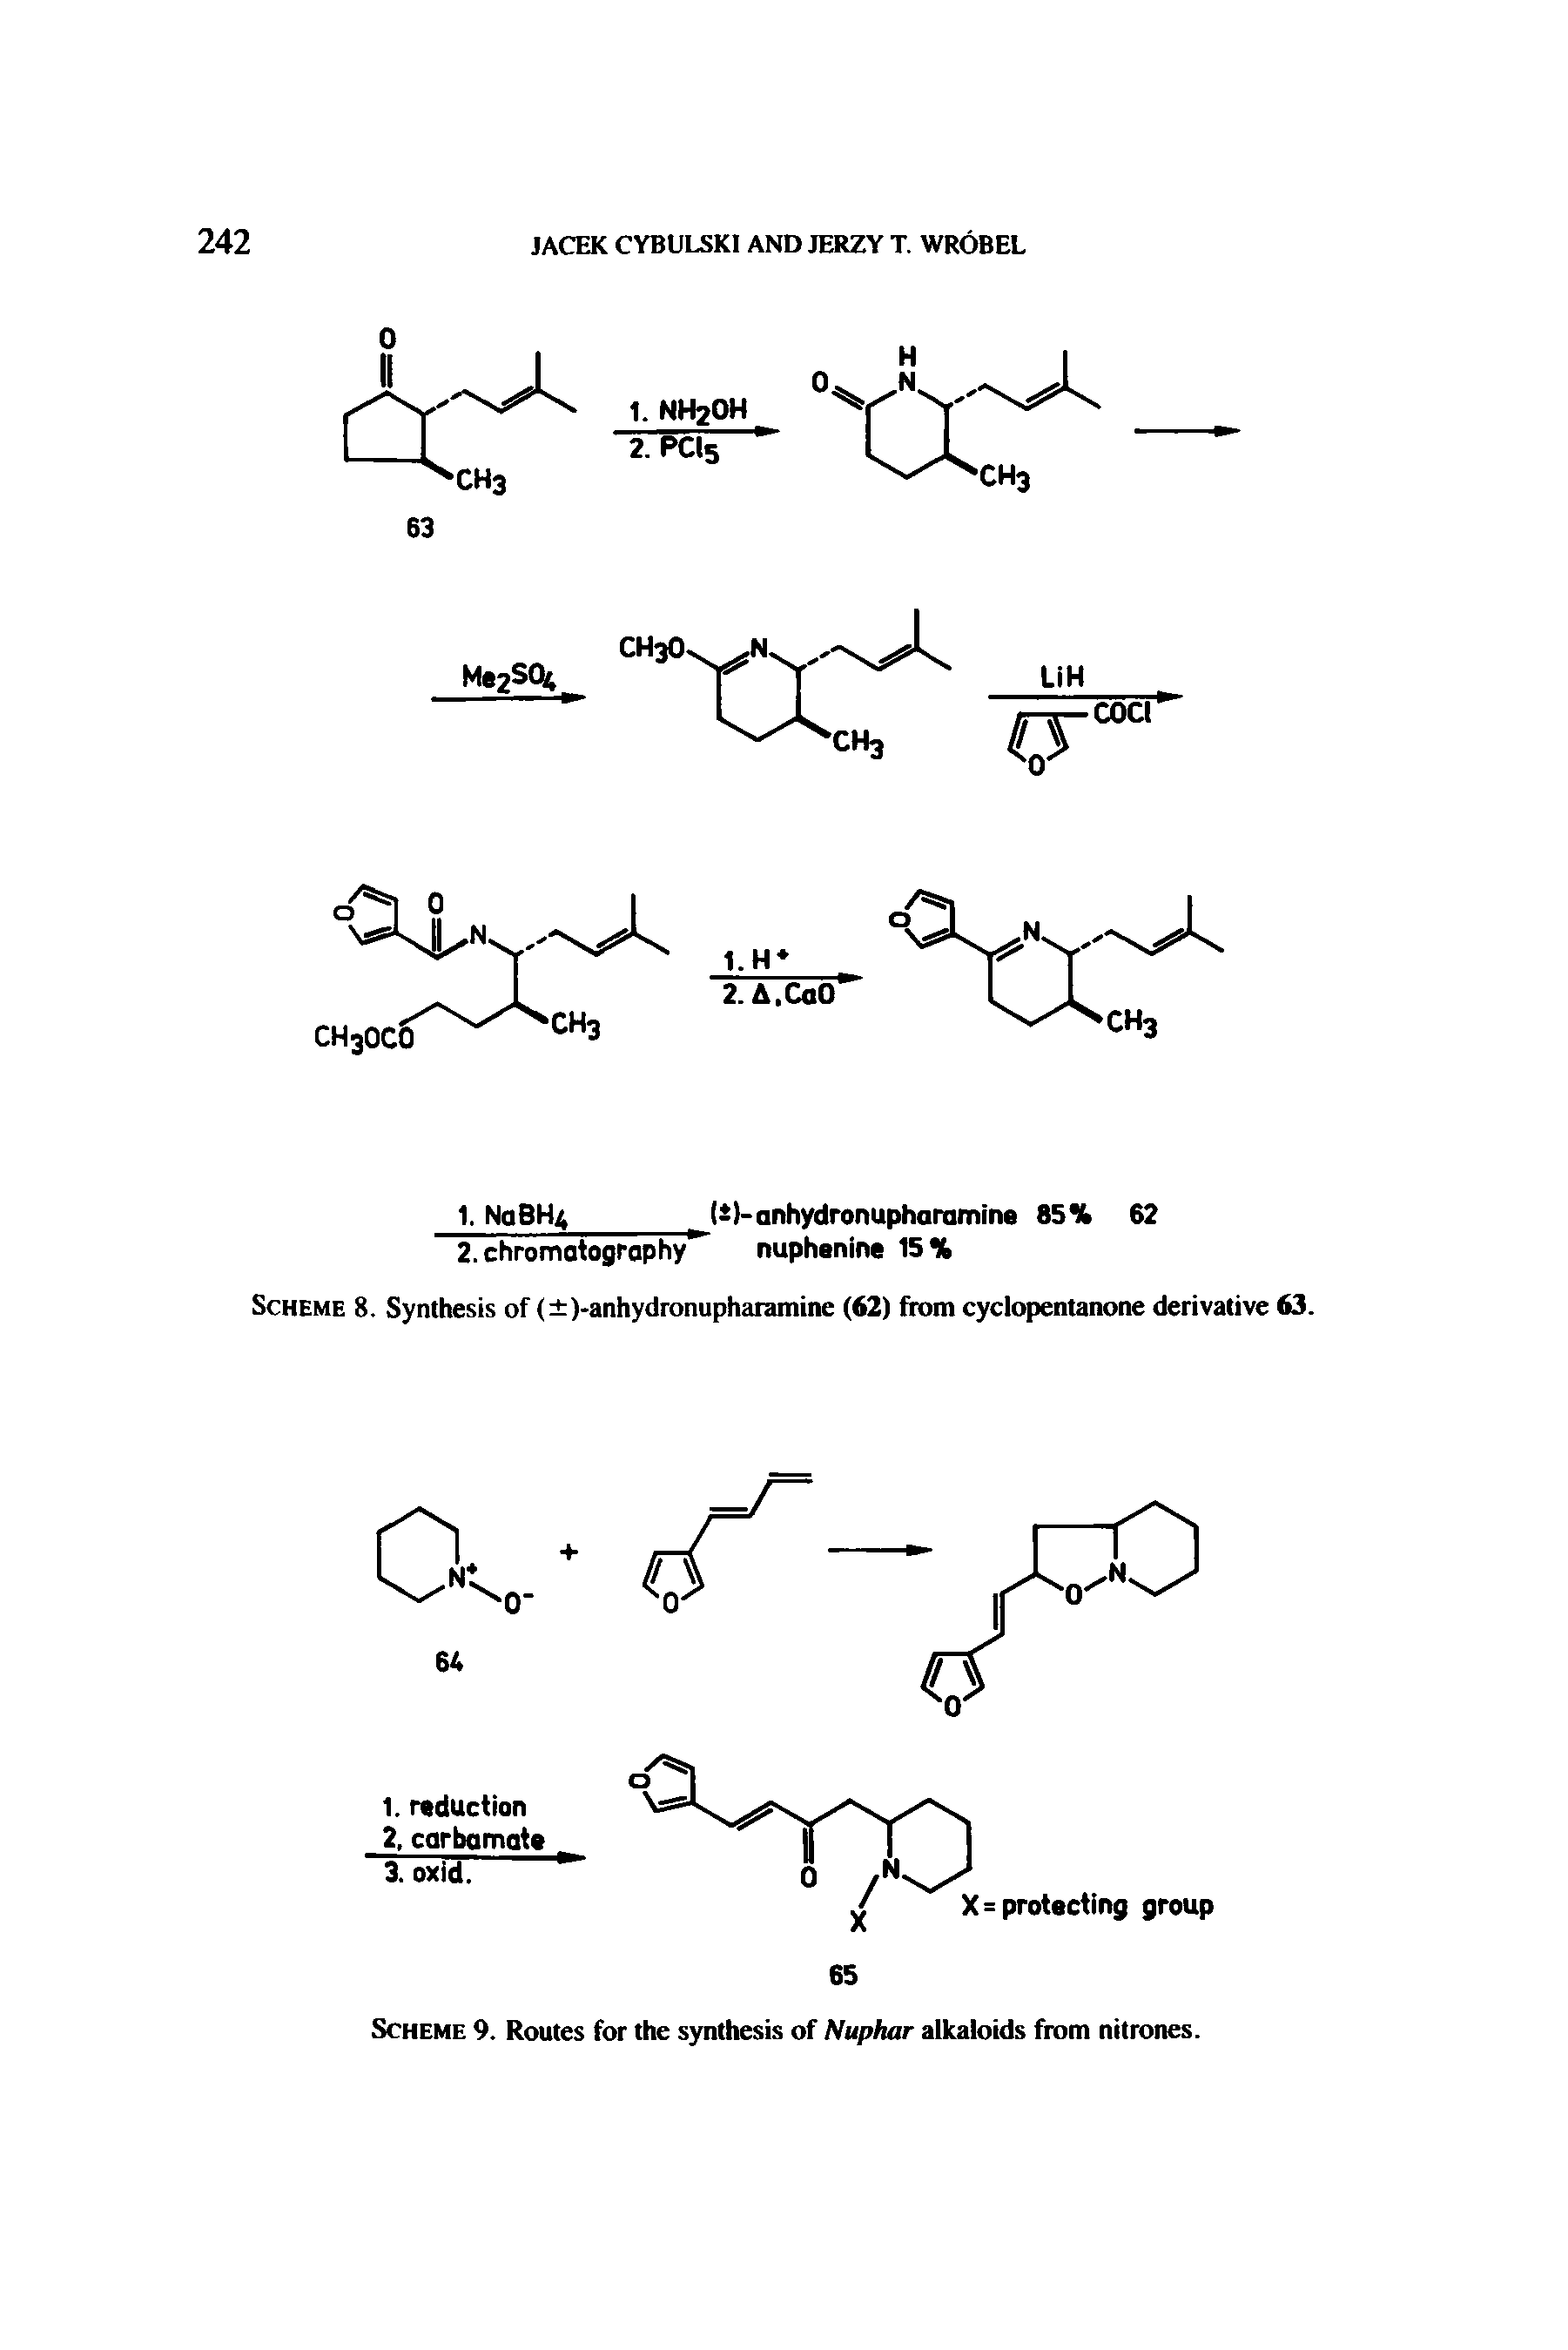 Scheme 9. Routes for the synthesis of Nuphar alkaloids from nitrones.